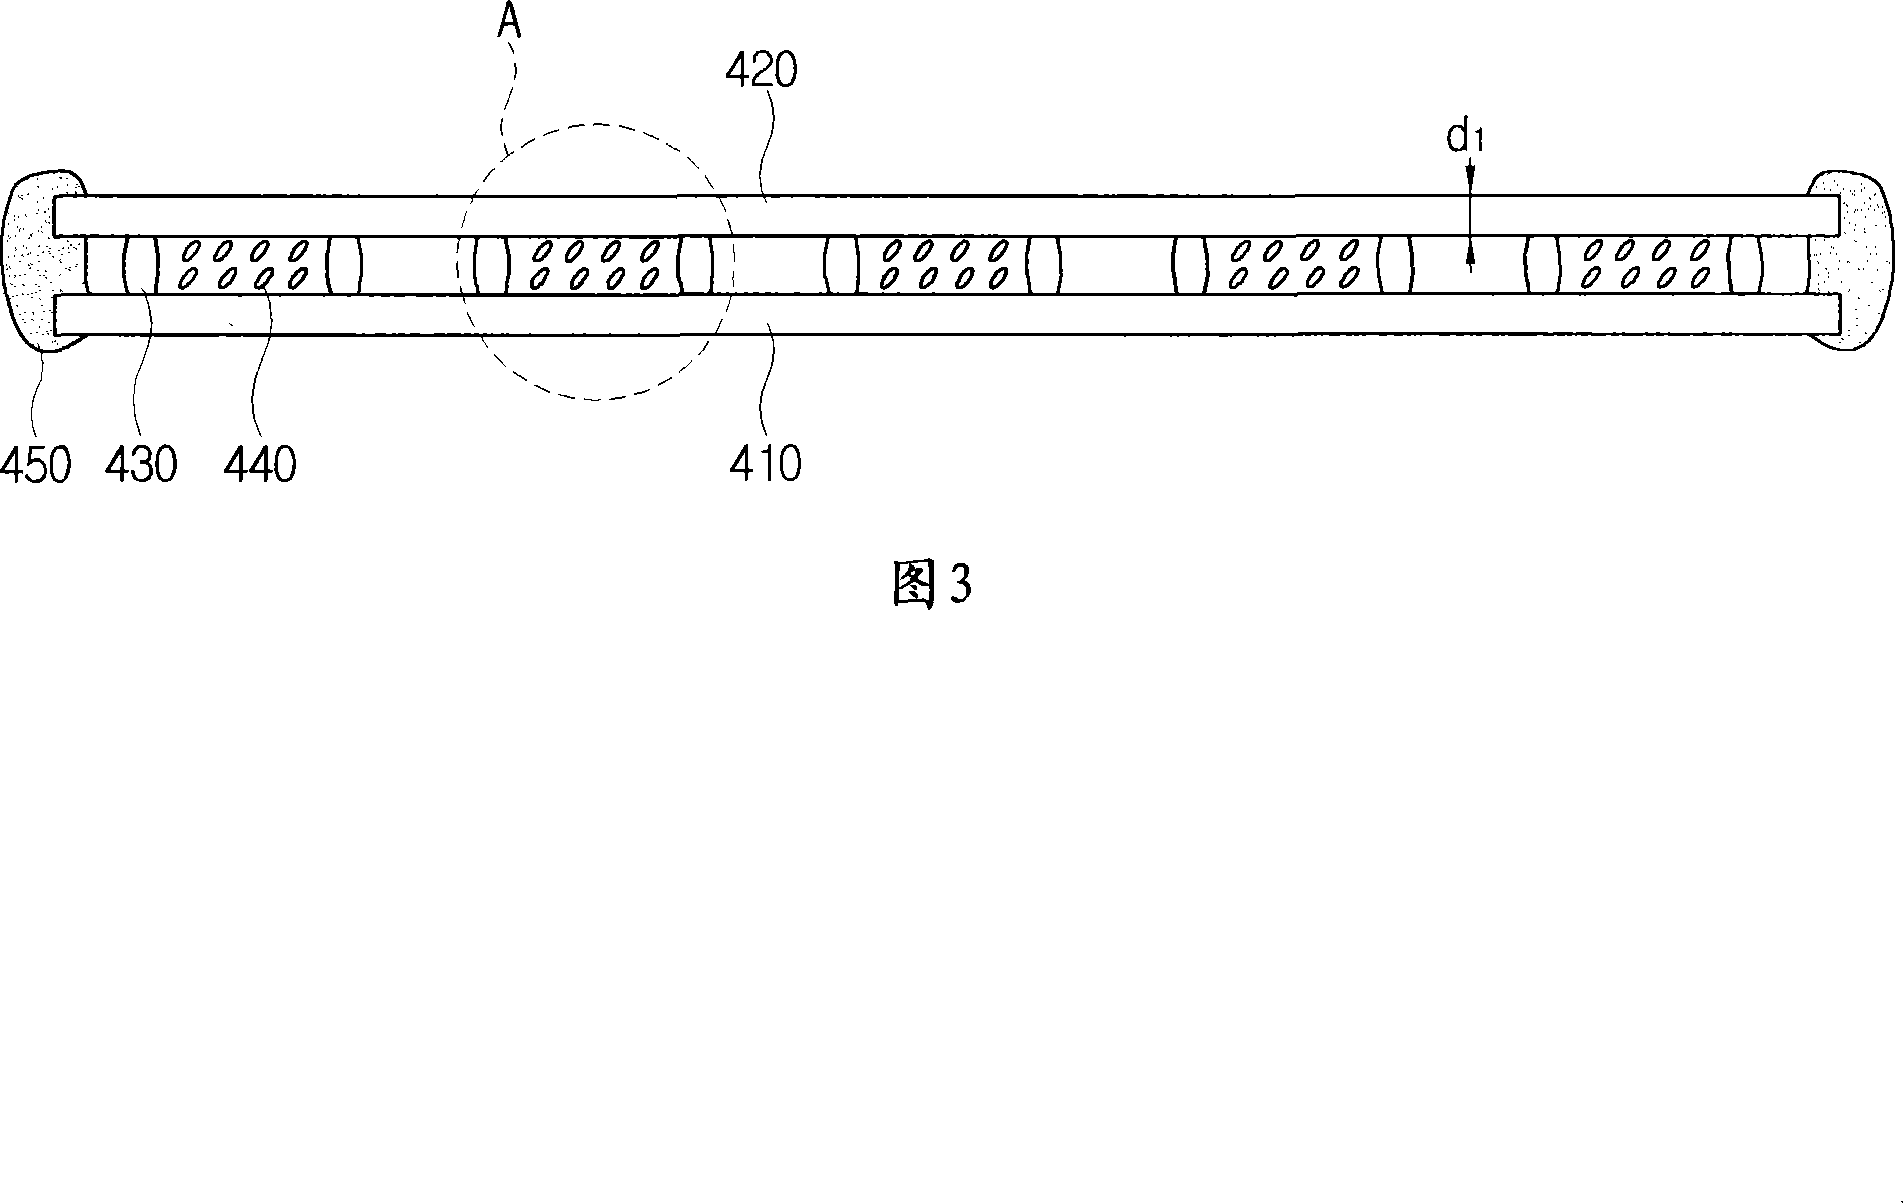 Etching liquid supply device, etching device and etching method